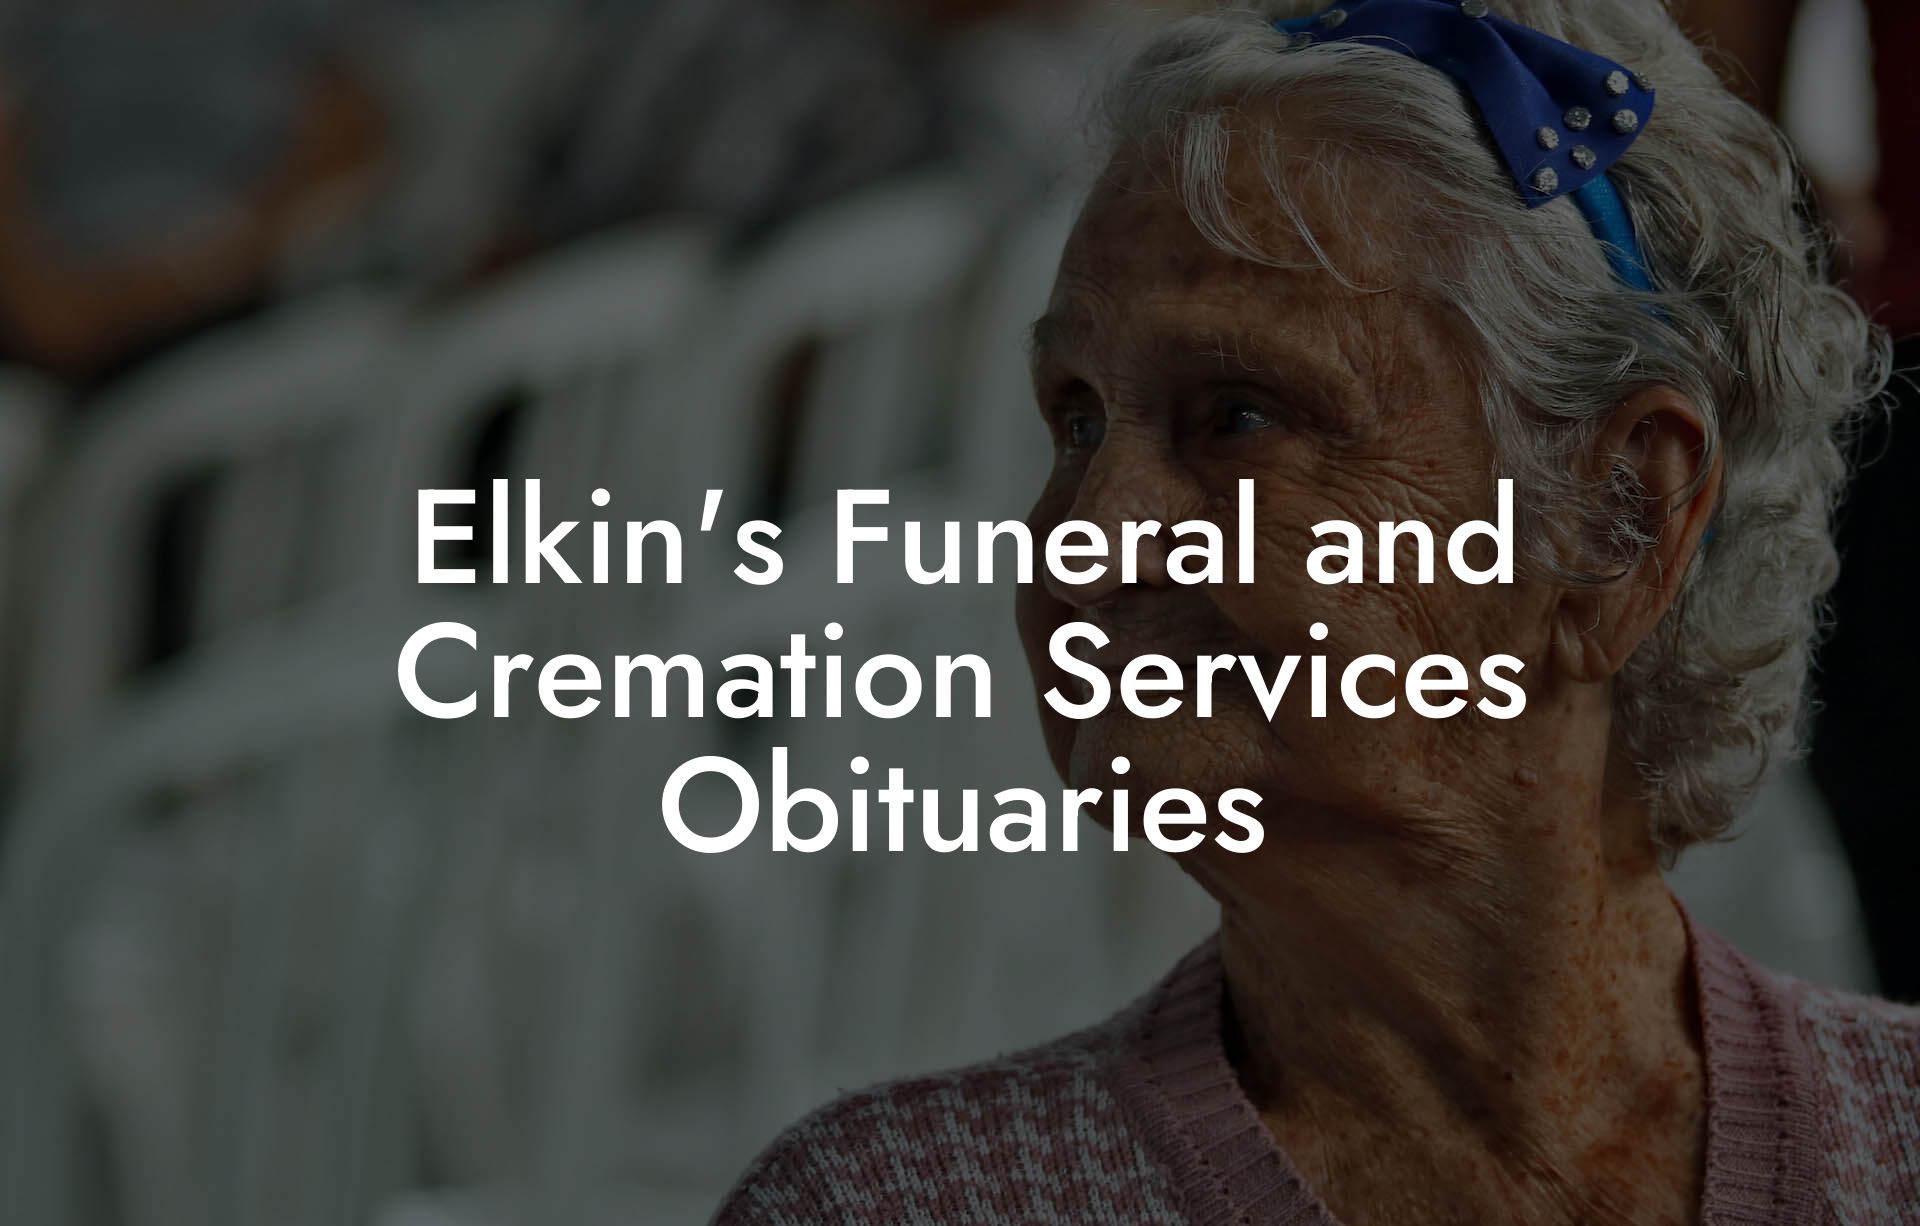 Elkin's Funeral and Cremation Services Obituaries